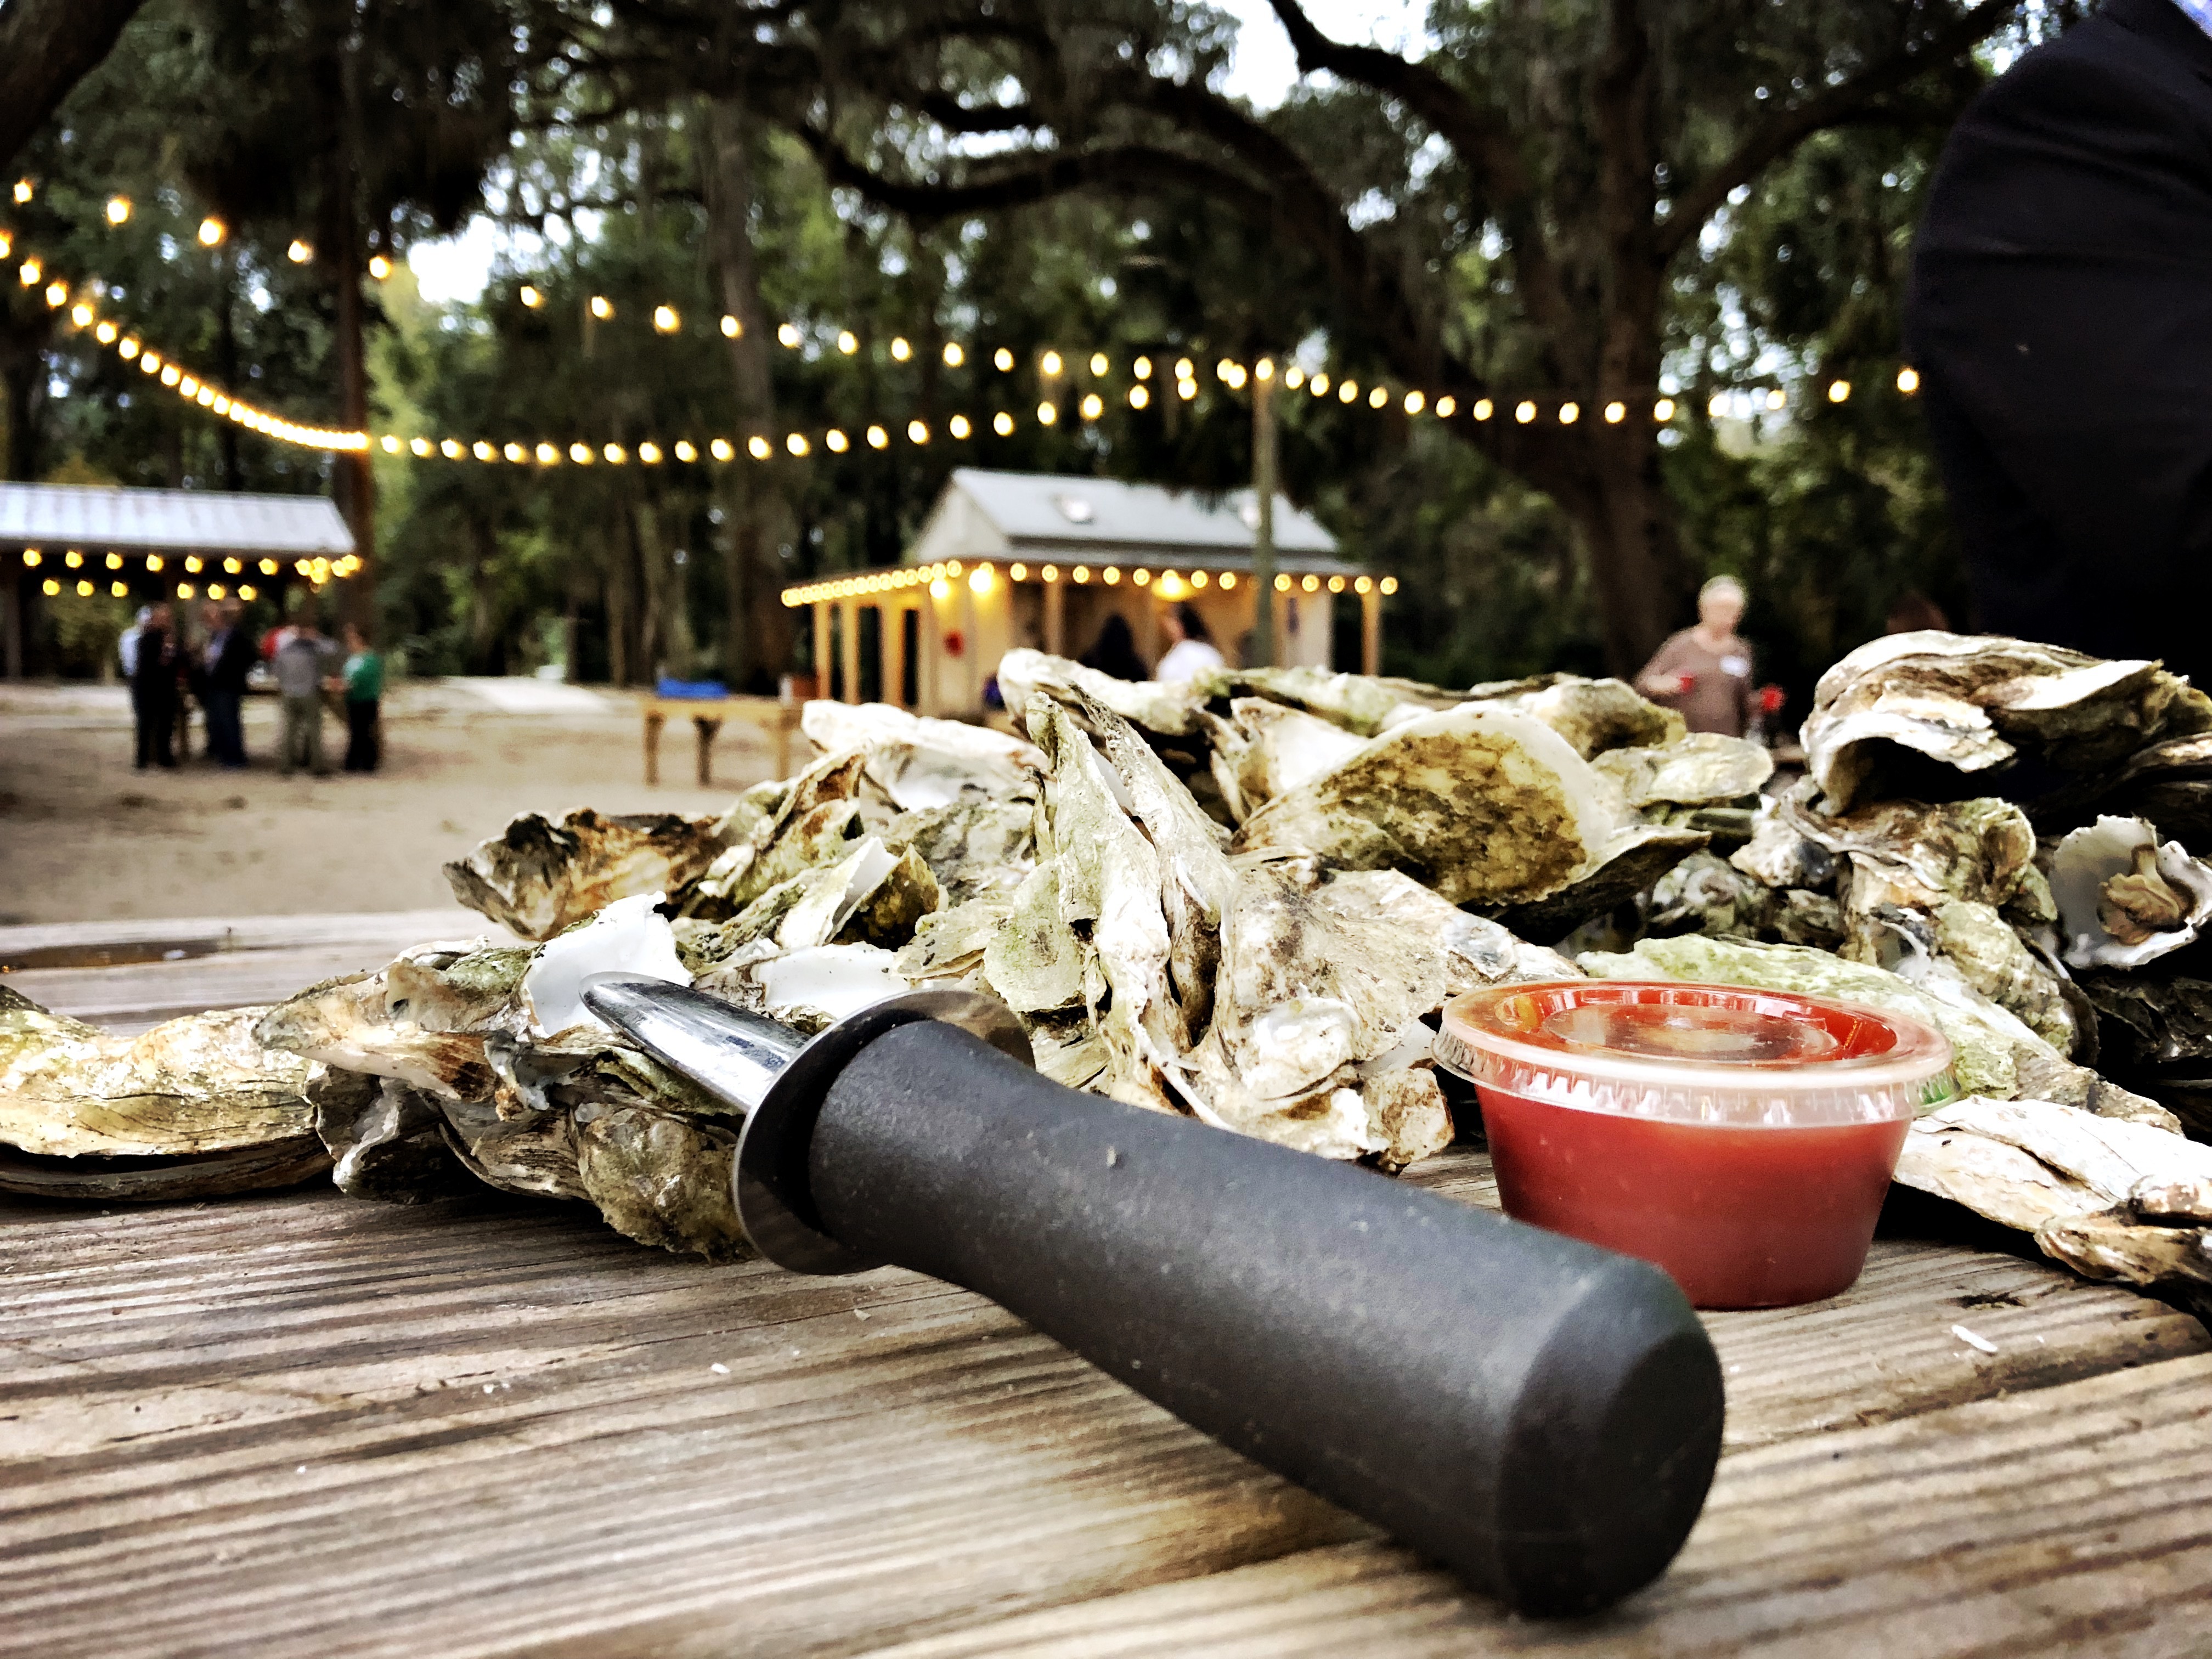 Local oyster roasts in January and February 2023 for Bluffton, SC and Hilton Head Island